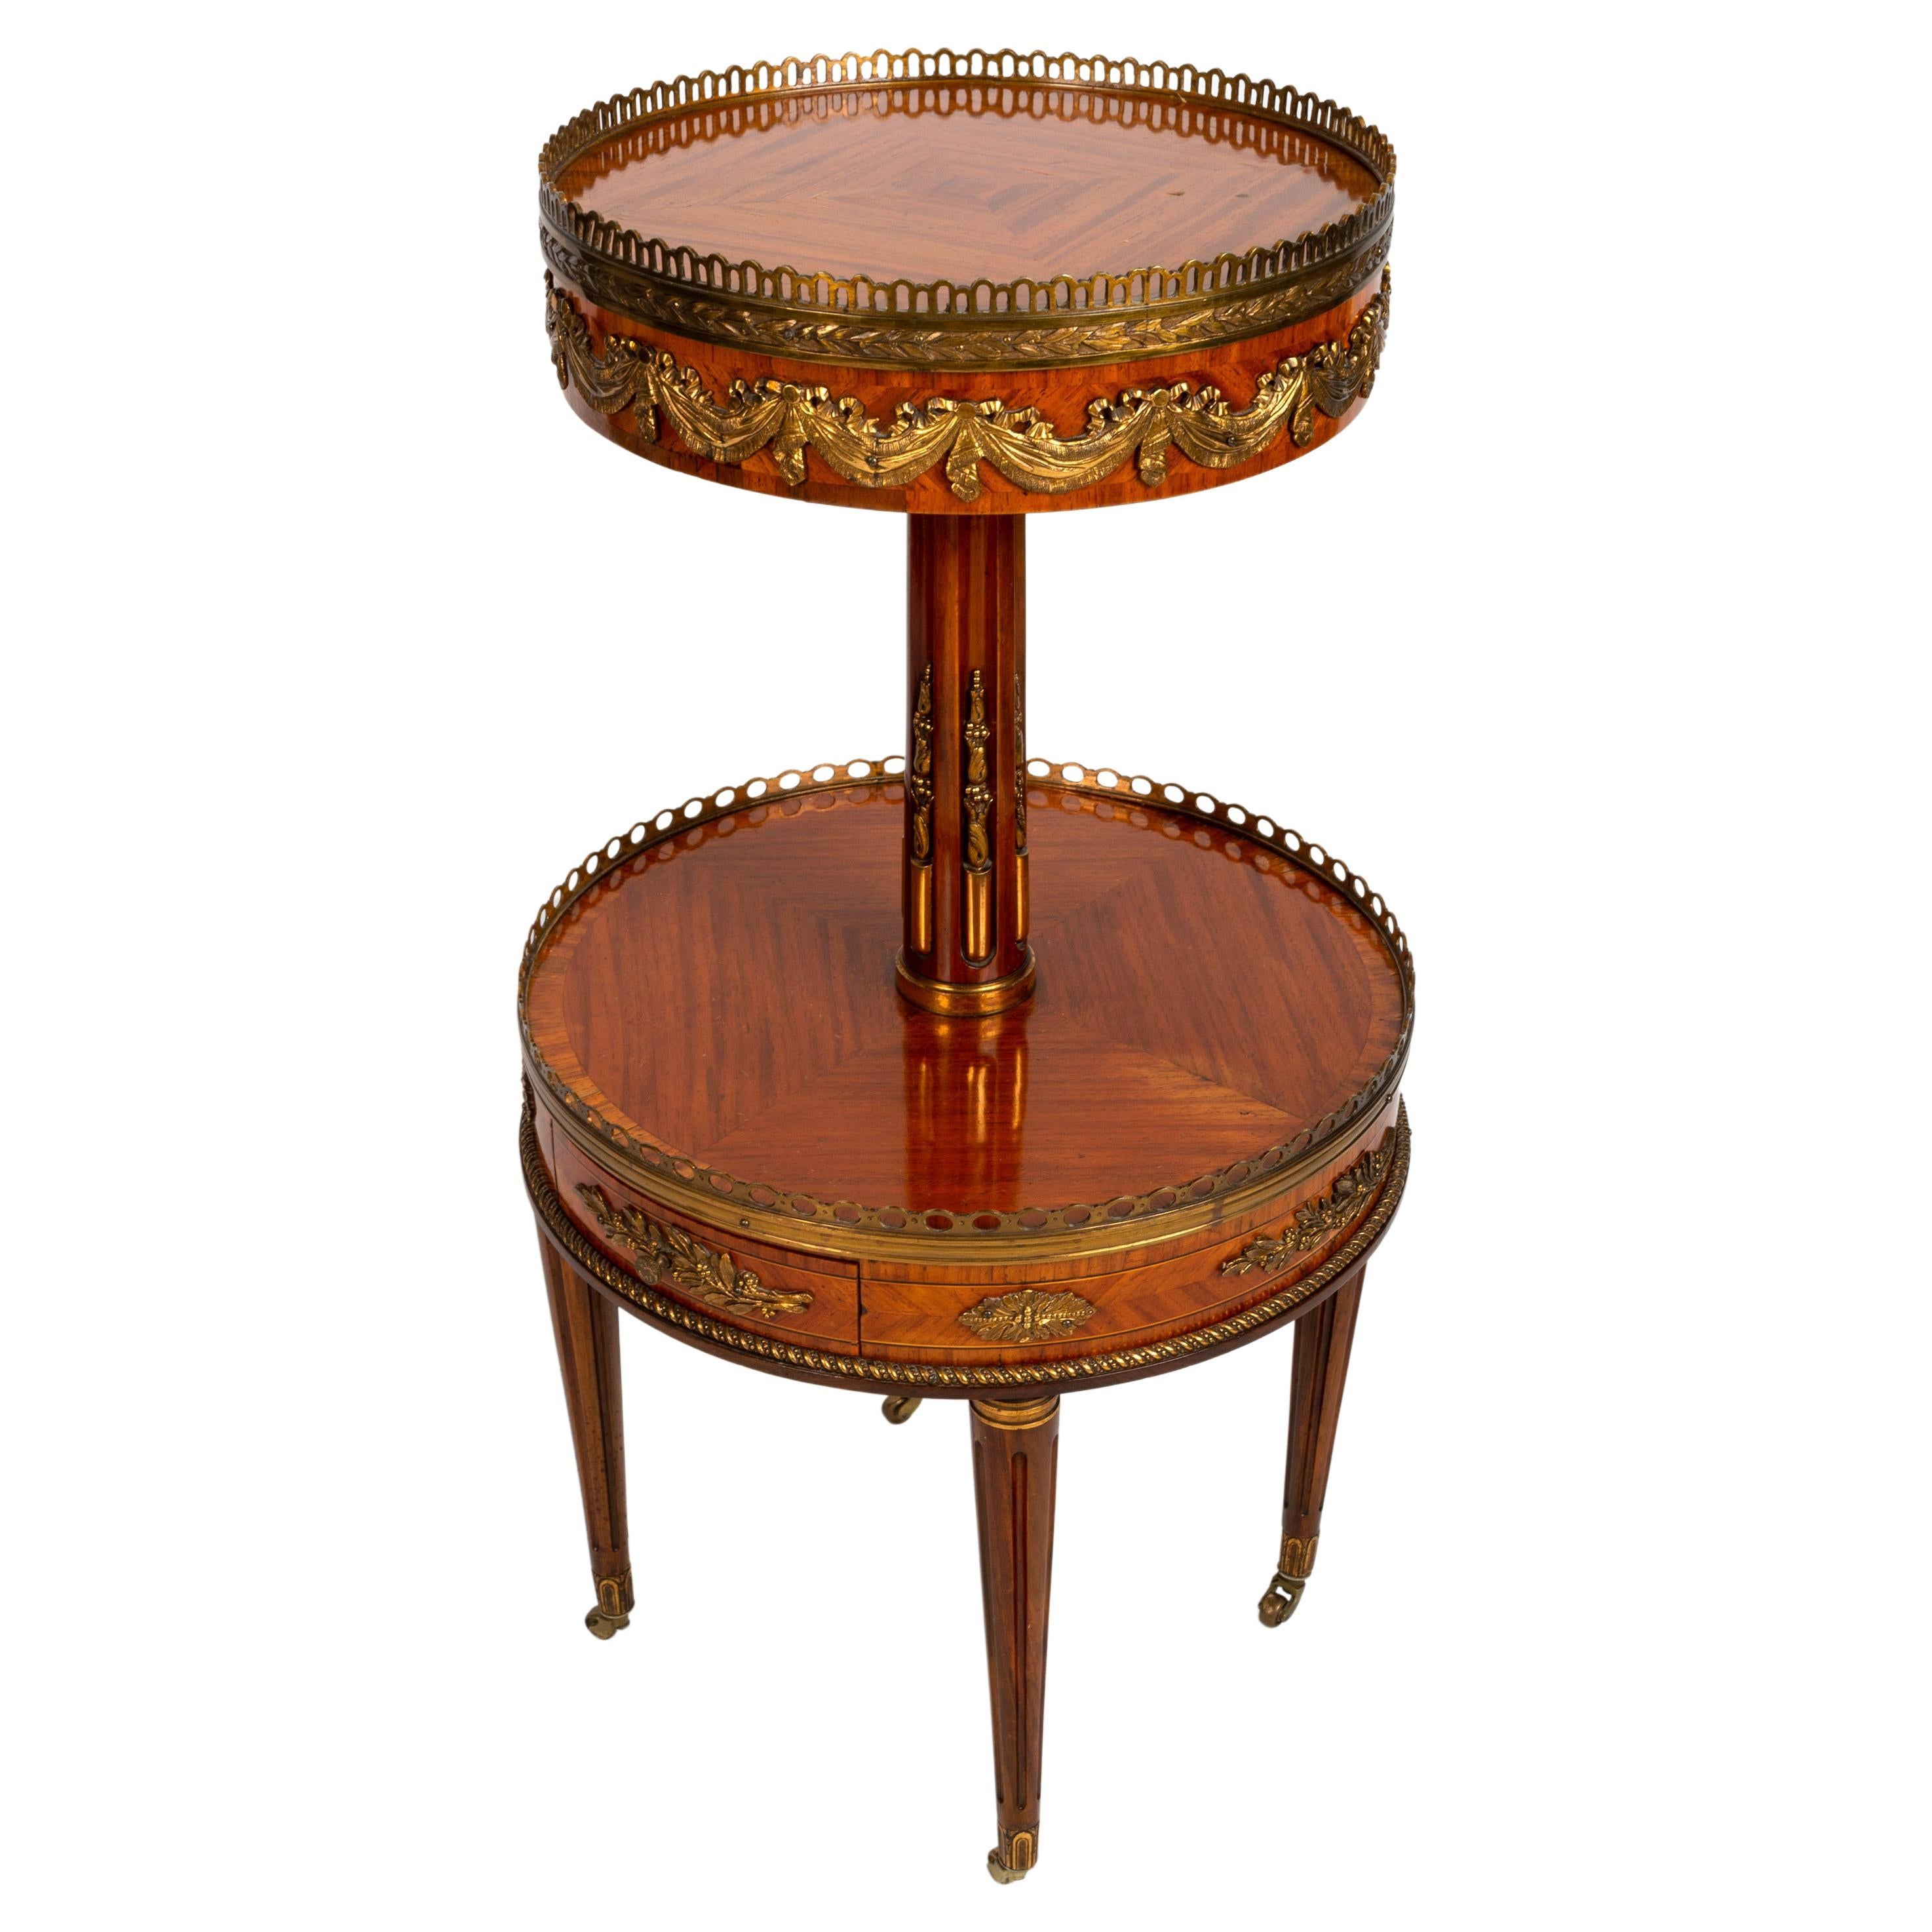 An antique French louis xv revival kingwood and ormolu etagere in the manner of francois linke, late 19th century

The circular quarter veneered and cross banded top with a pierced brass gallery and gilt metal swags, on a fluted stem, over a